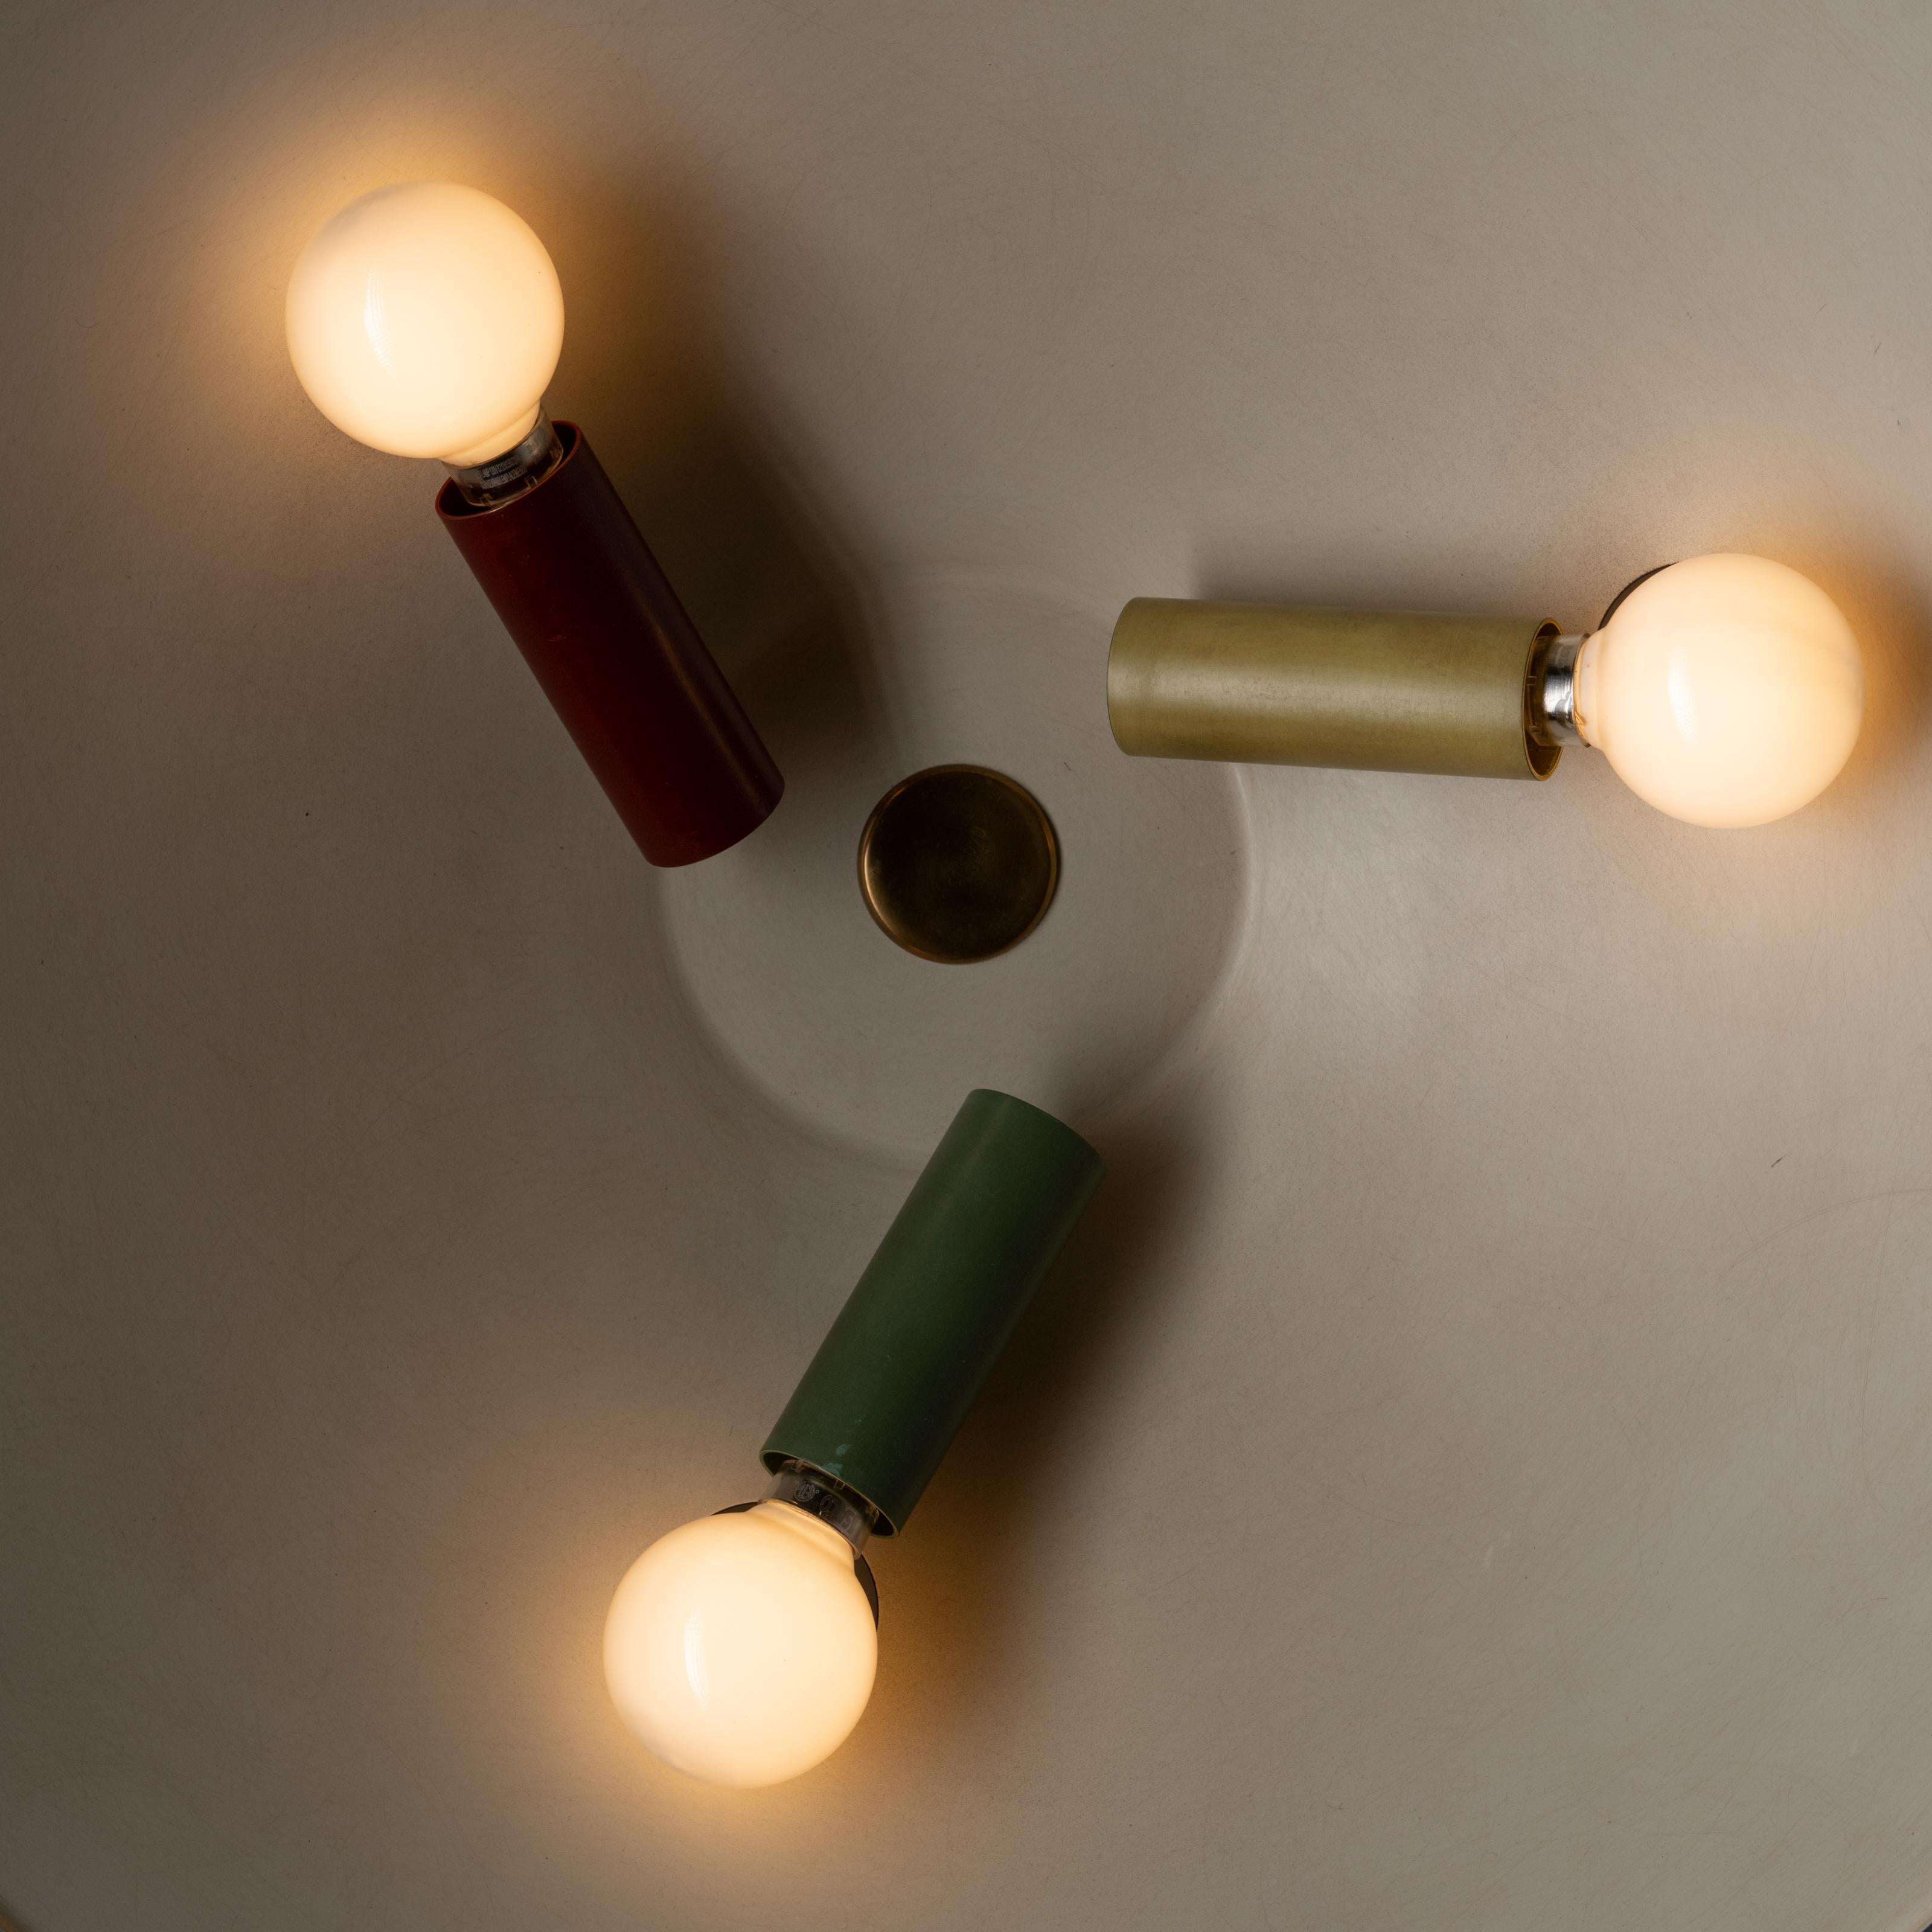 Rare flush mount ceiling lights by Stilnovo. Manufactured in Italy, circa 1950s. Enameled aluminum with a trio of red, yellow, and green socket covers. Hardware in brass. Rewired for U.S standards. Holds three E14 sockets, adapted for the US.